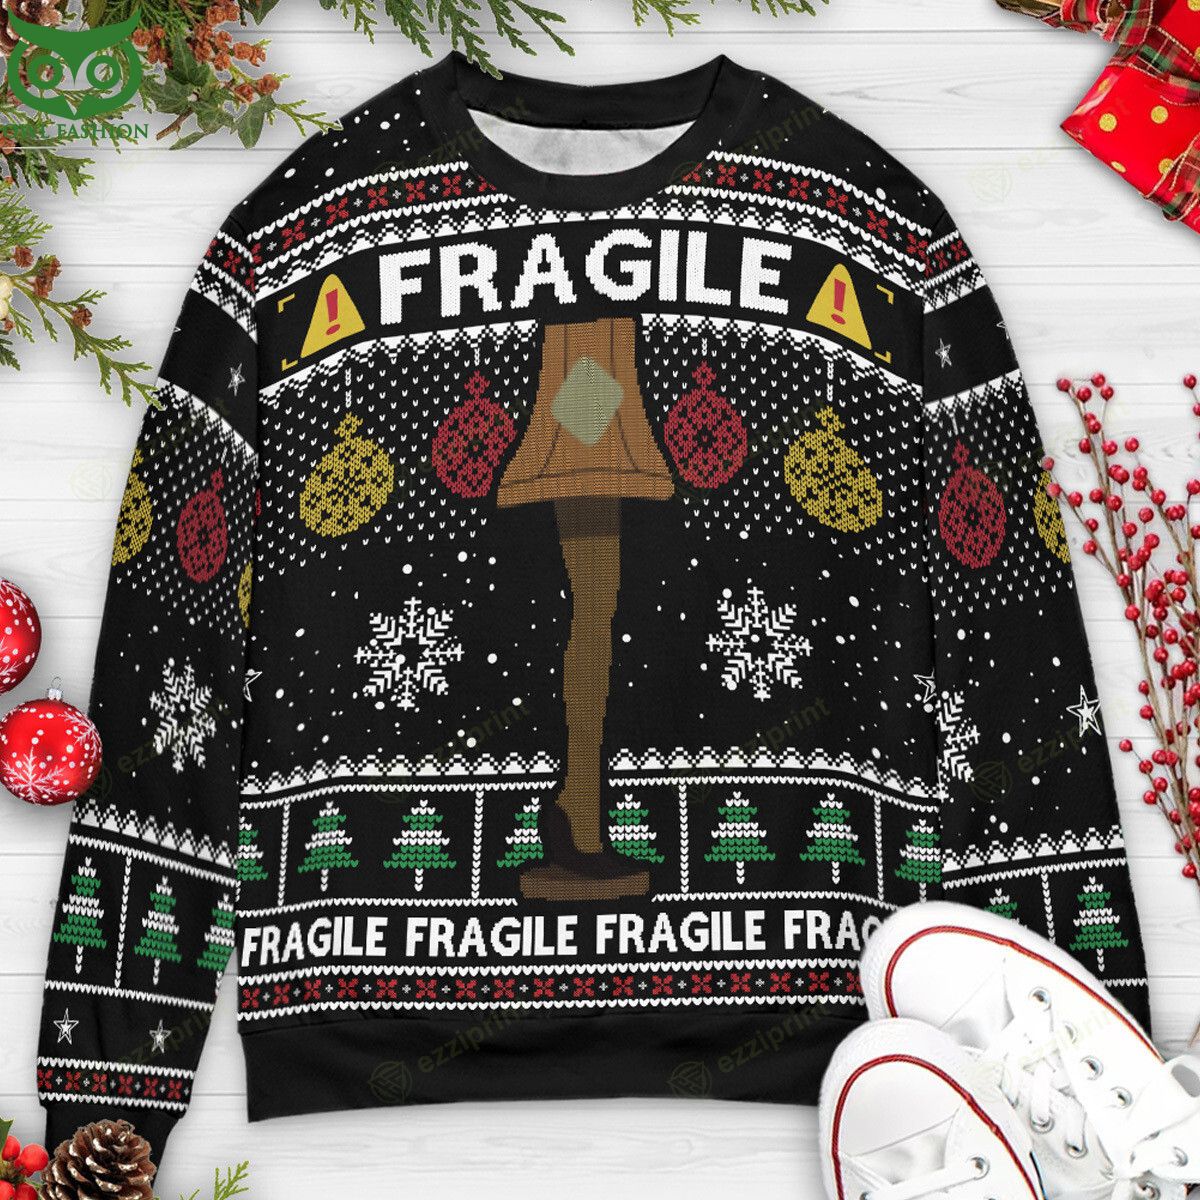 Fragile Leg Lamp A Christmas Story Sweater Have you joined a gymnasium?